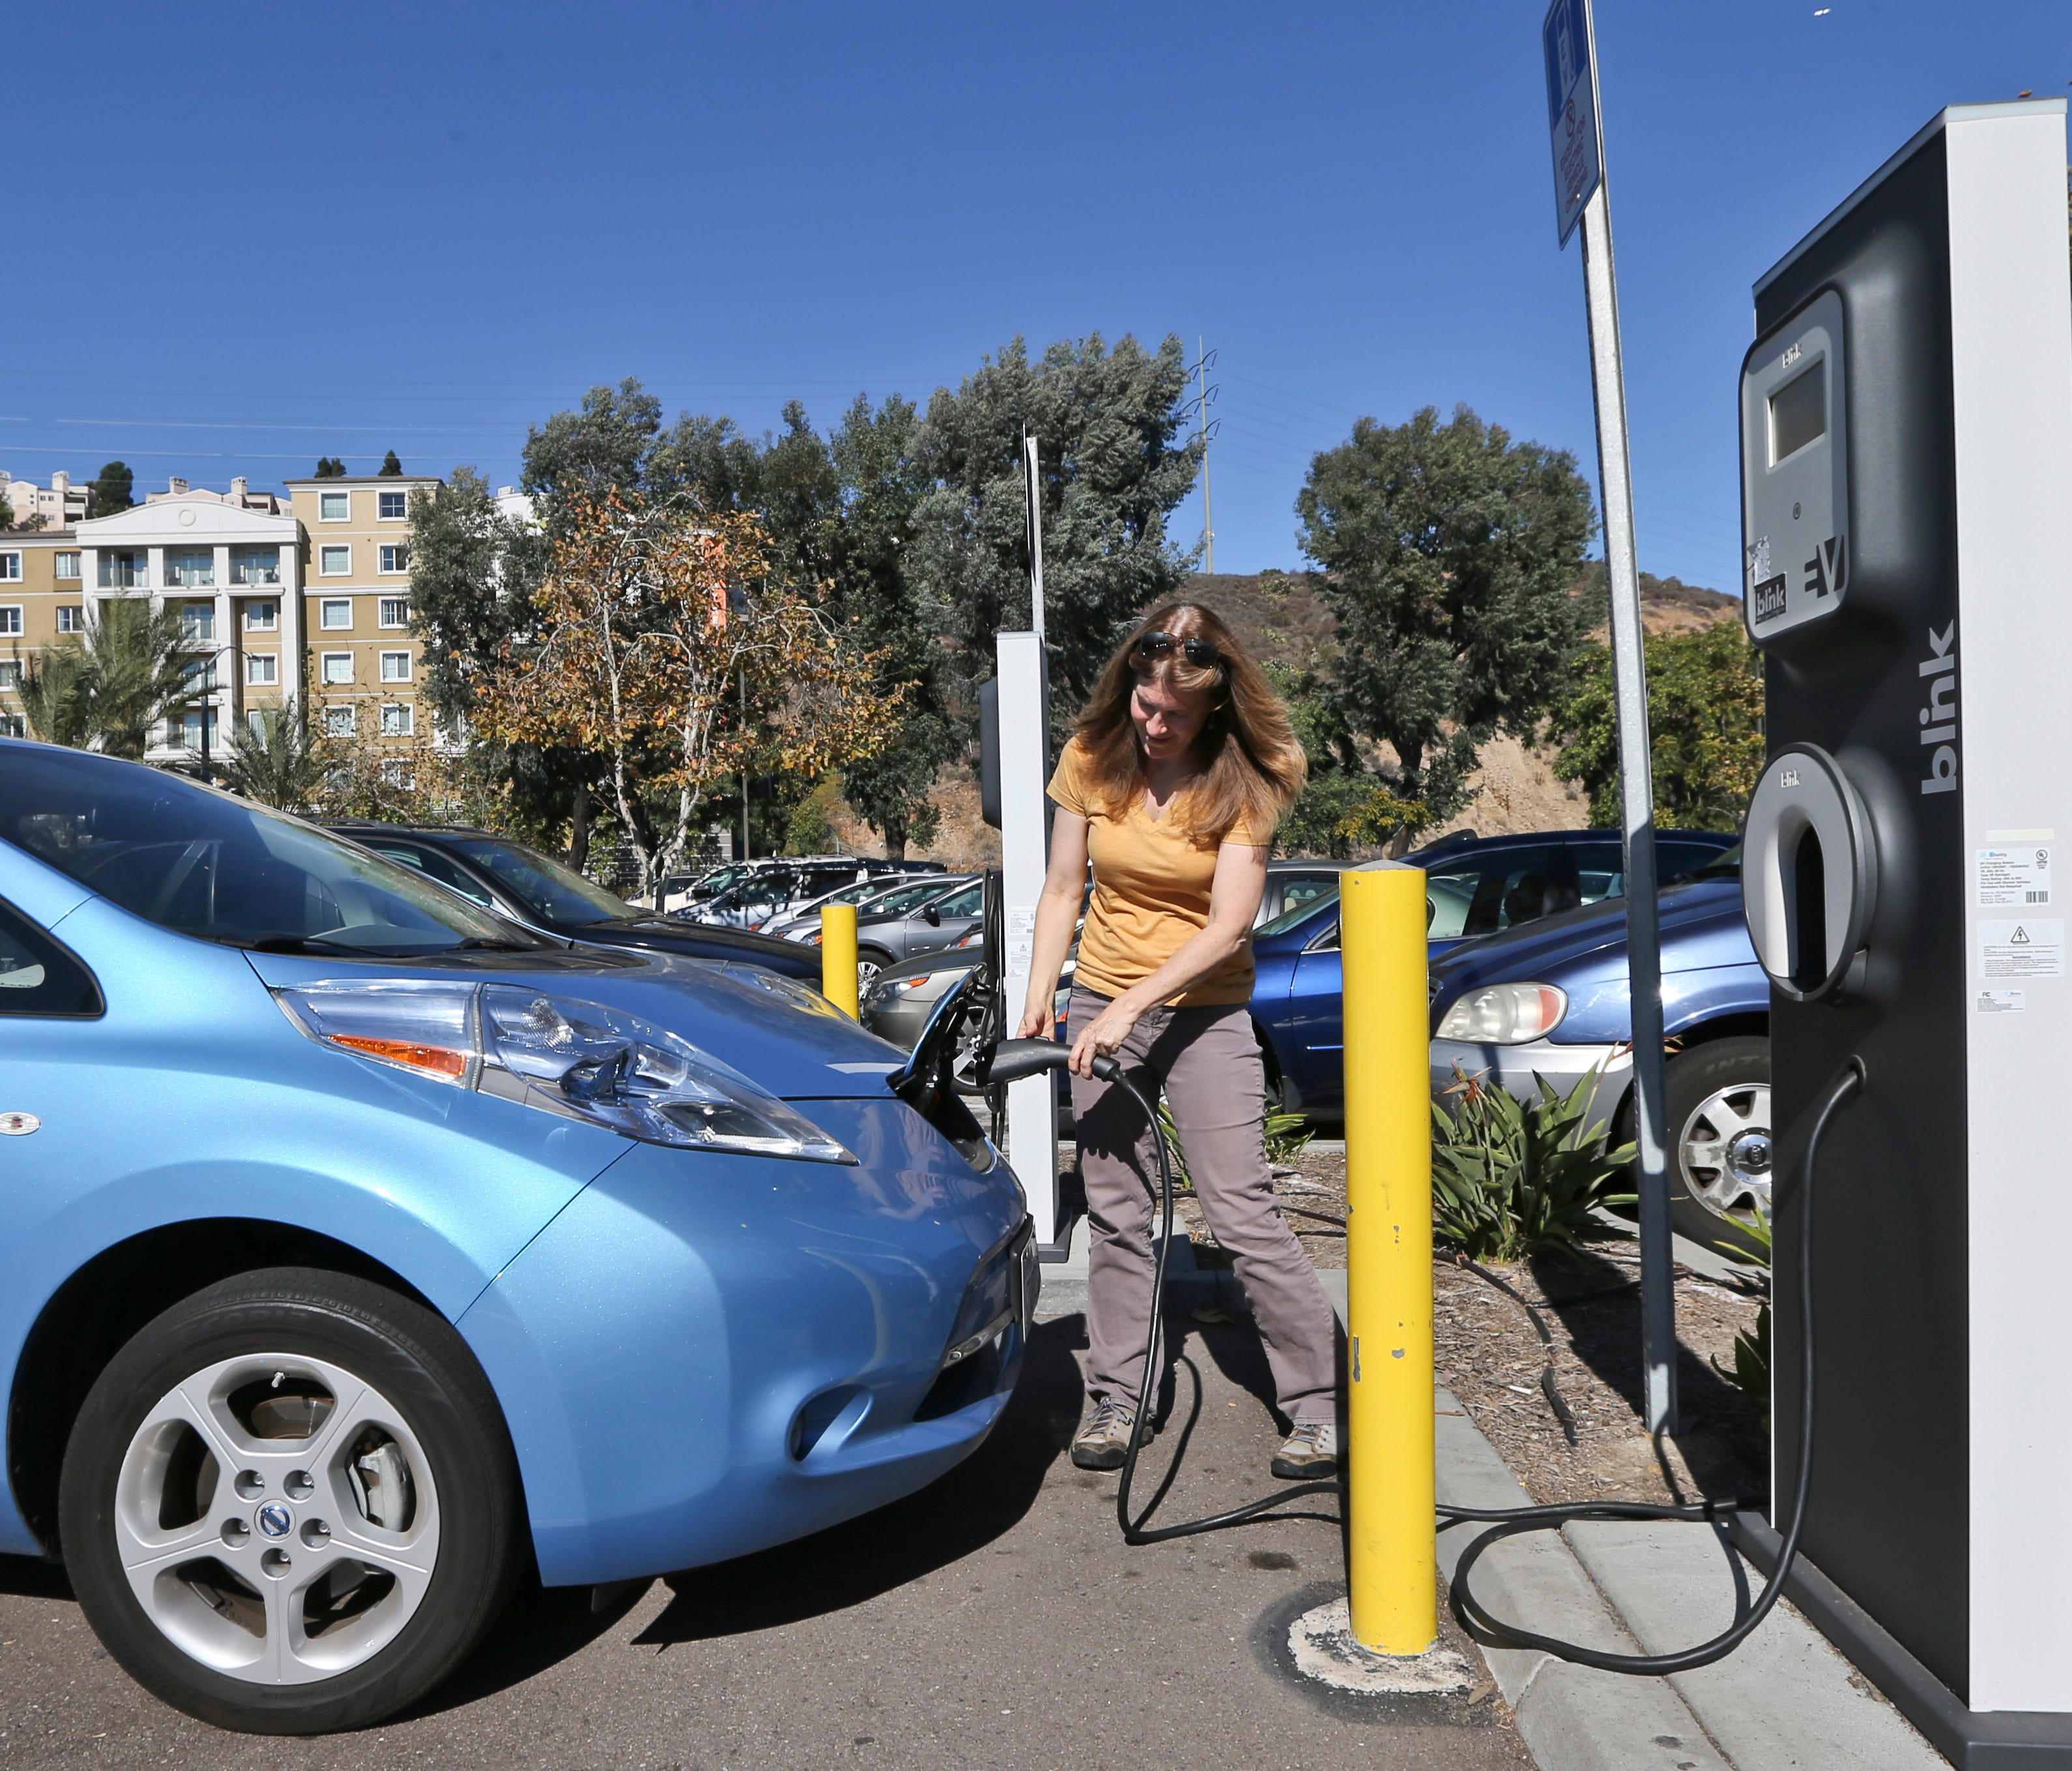 Angie Vorhies plugs in the charging cord to her Nissan Leaf electric vehicle  at a mall in San Diego in this 2013 file photo